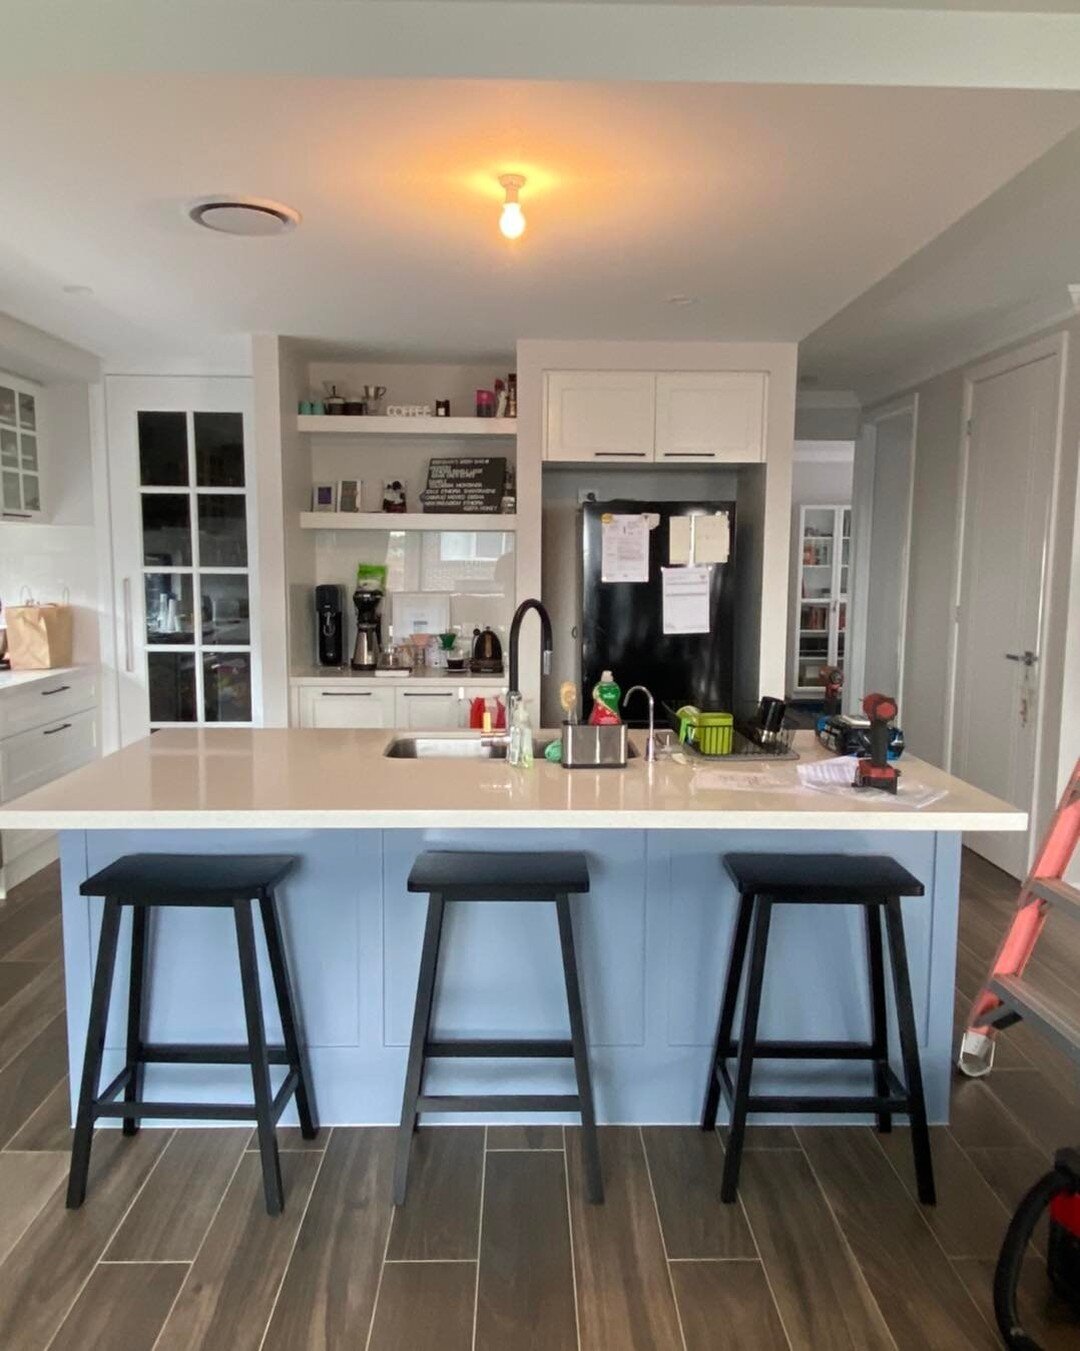 🤩 This stunning pendant light is a great feature that accentuates an already beautiful kitchen space. 🤩
#pendantlighting #kitchenlighting #localsparky